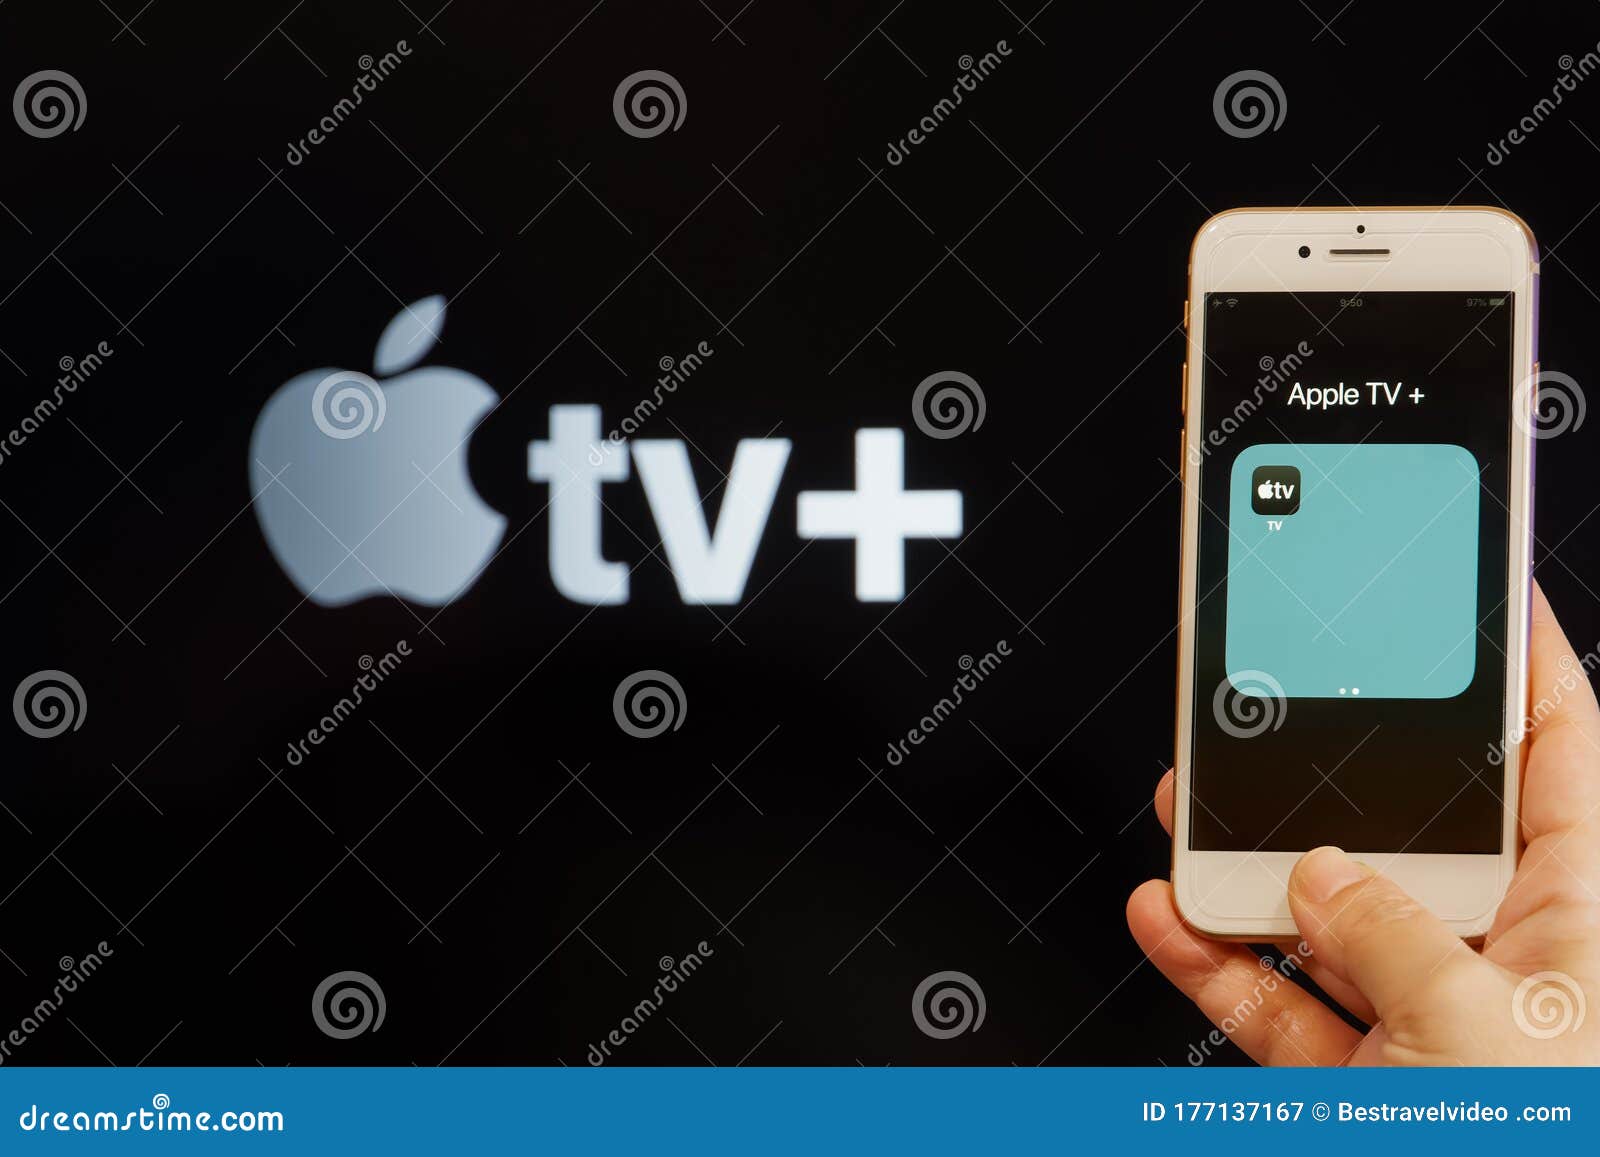 Apple Streaming Service VoD Content Provider Concept